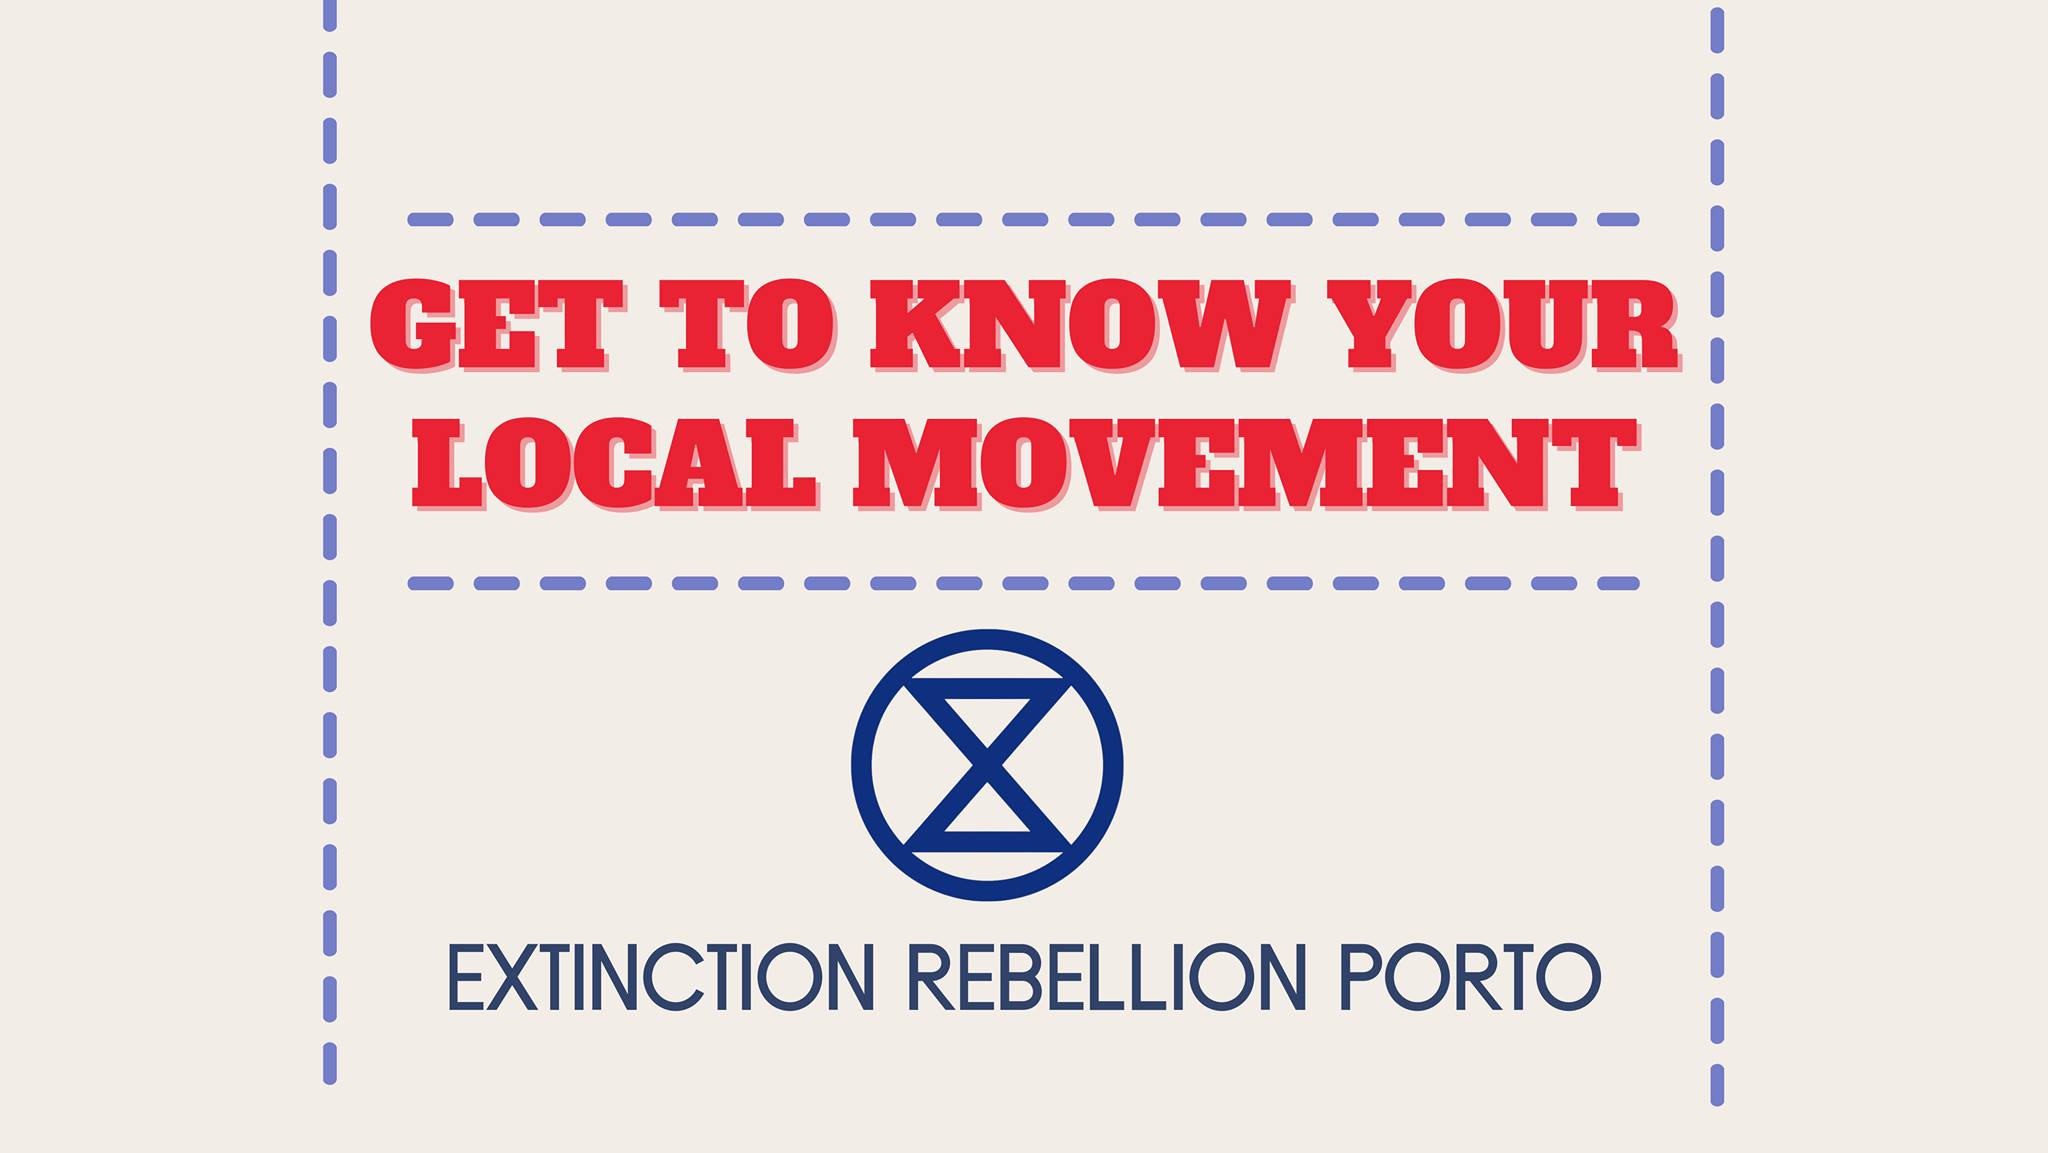 Get to know your local movement: Extinction Rebellion Porto